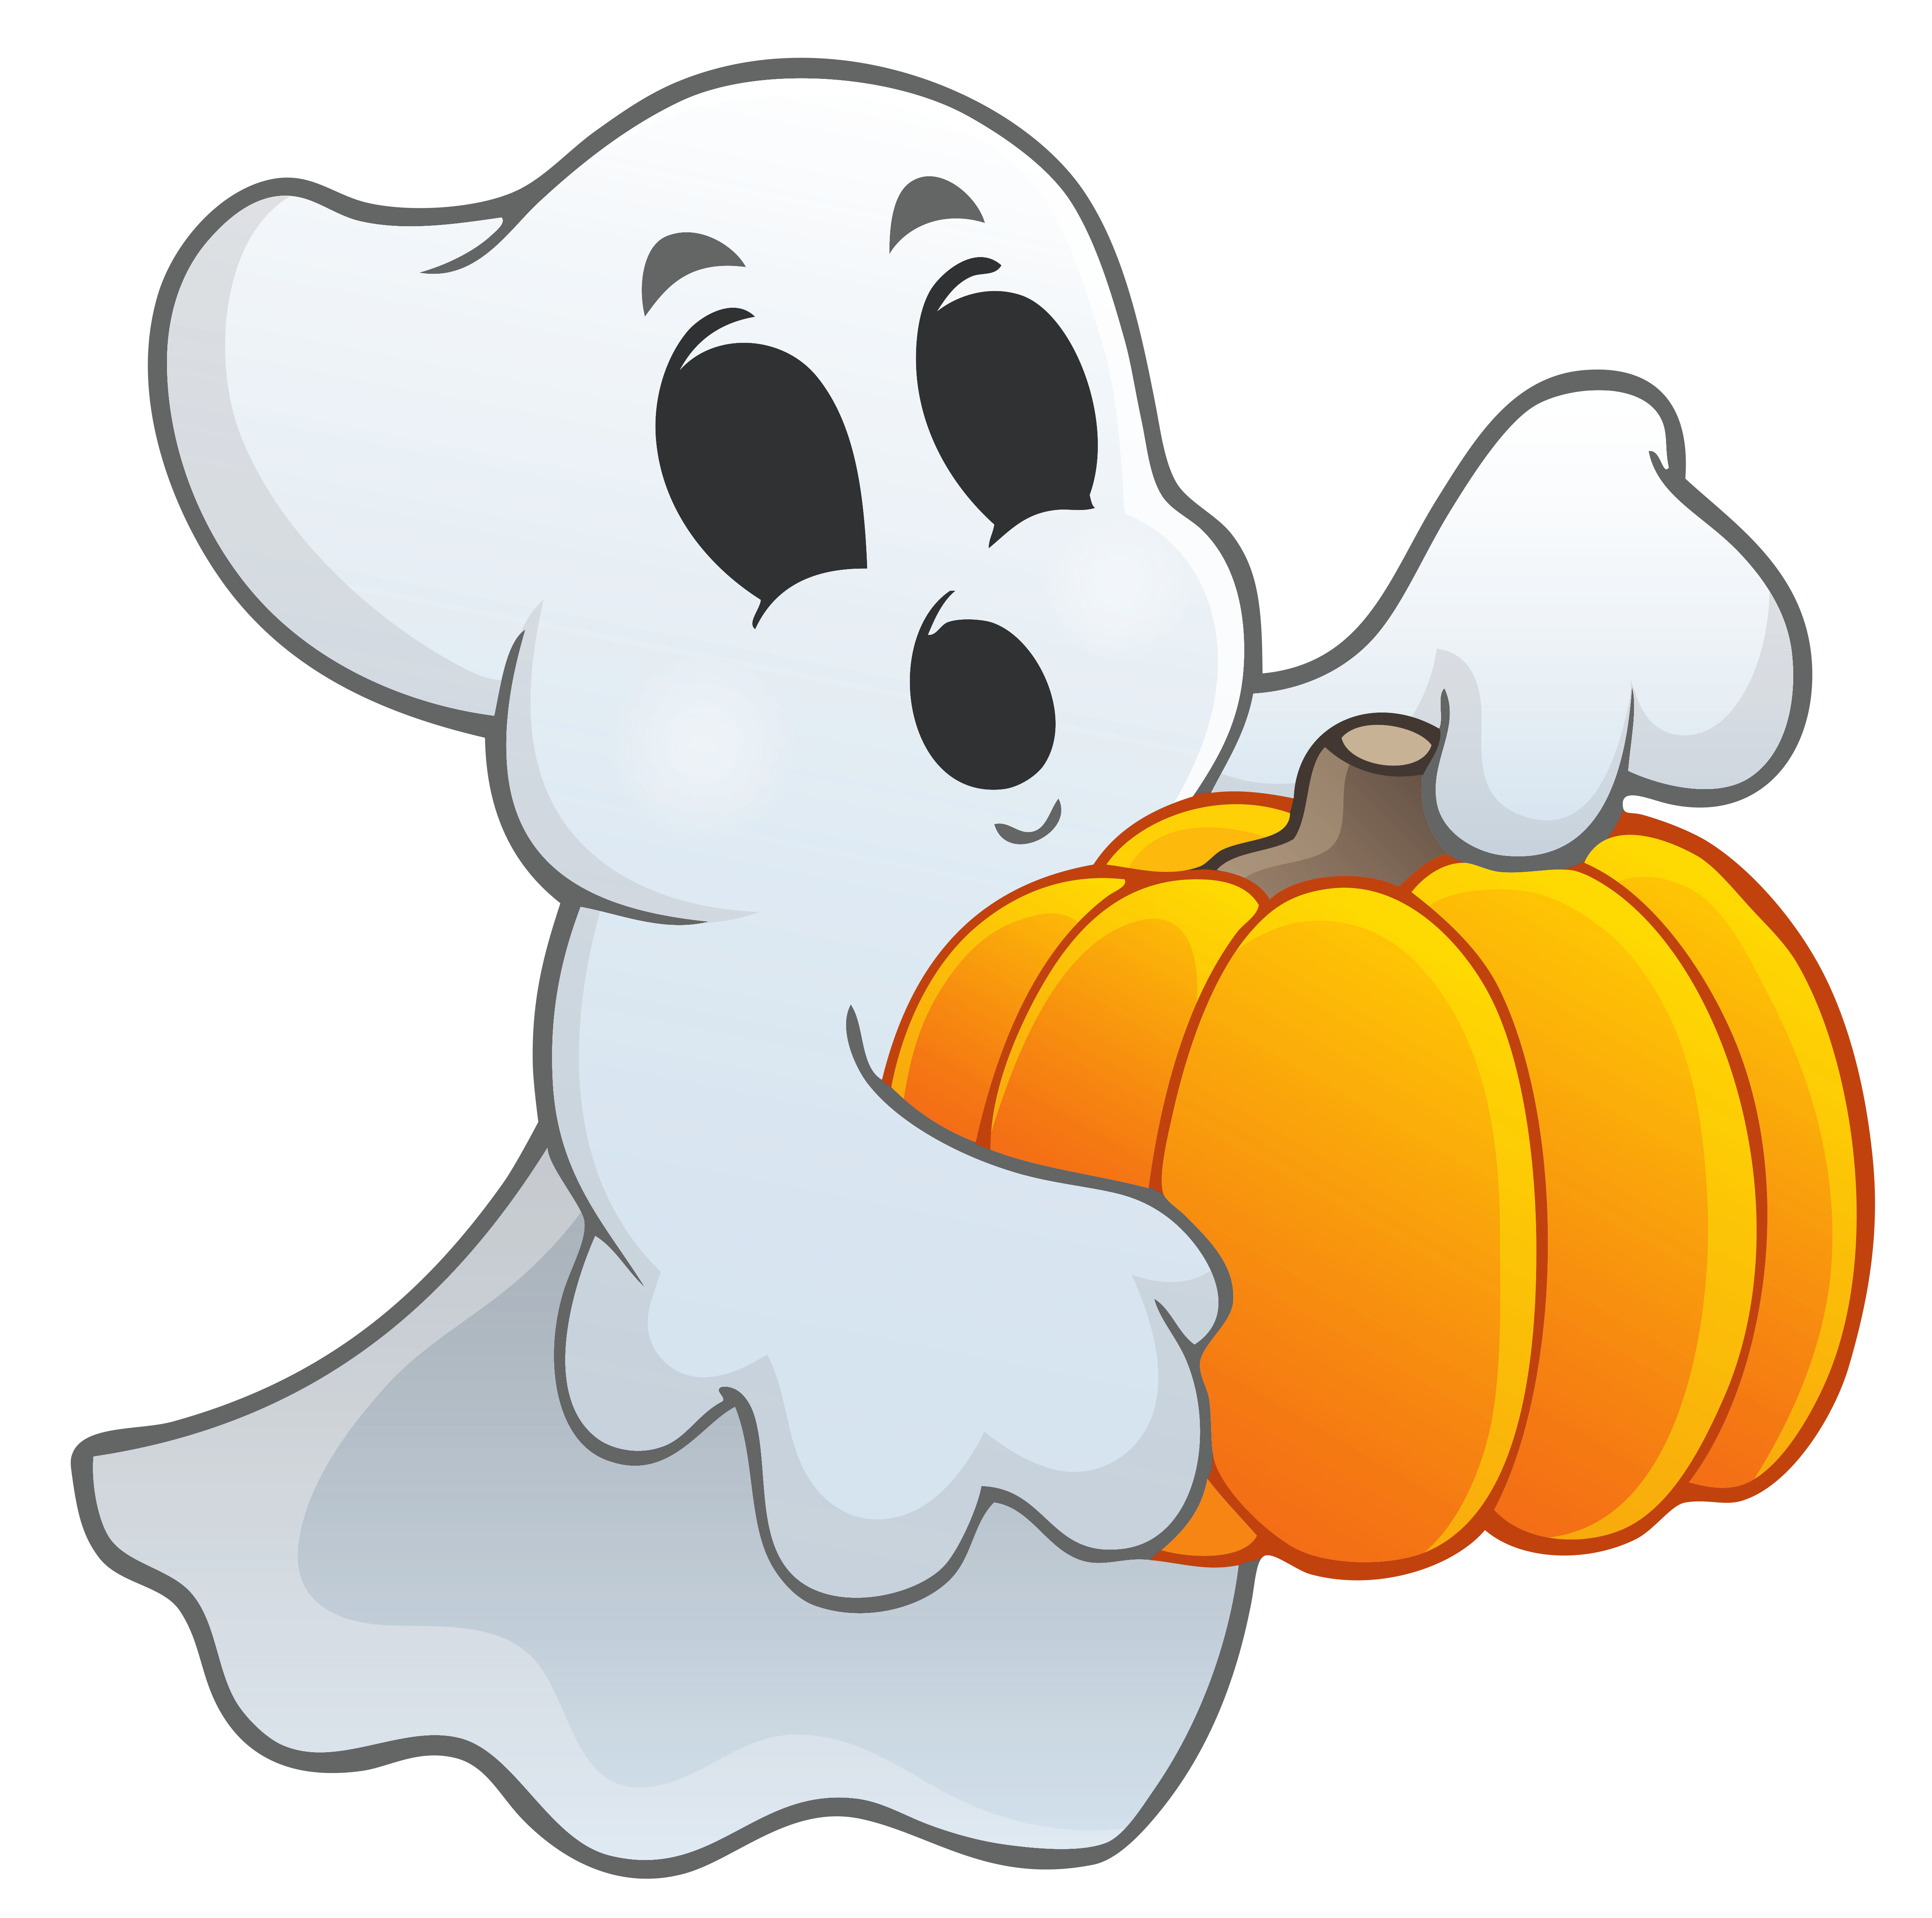 Ghost PNG images Download 